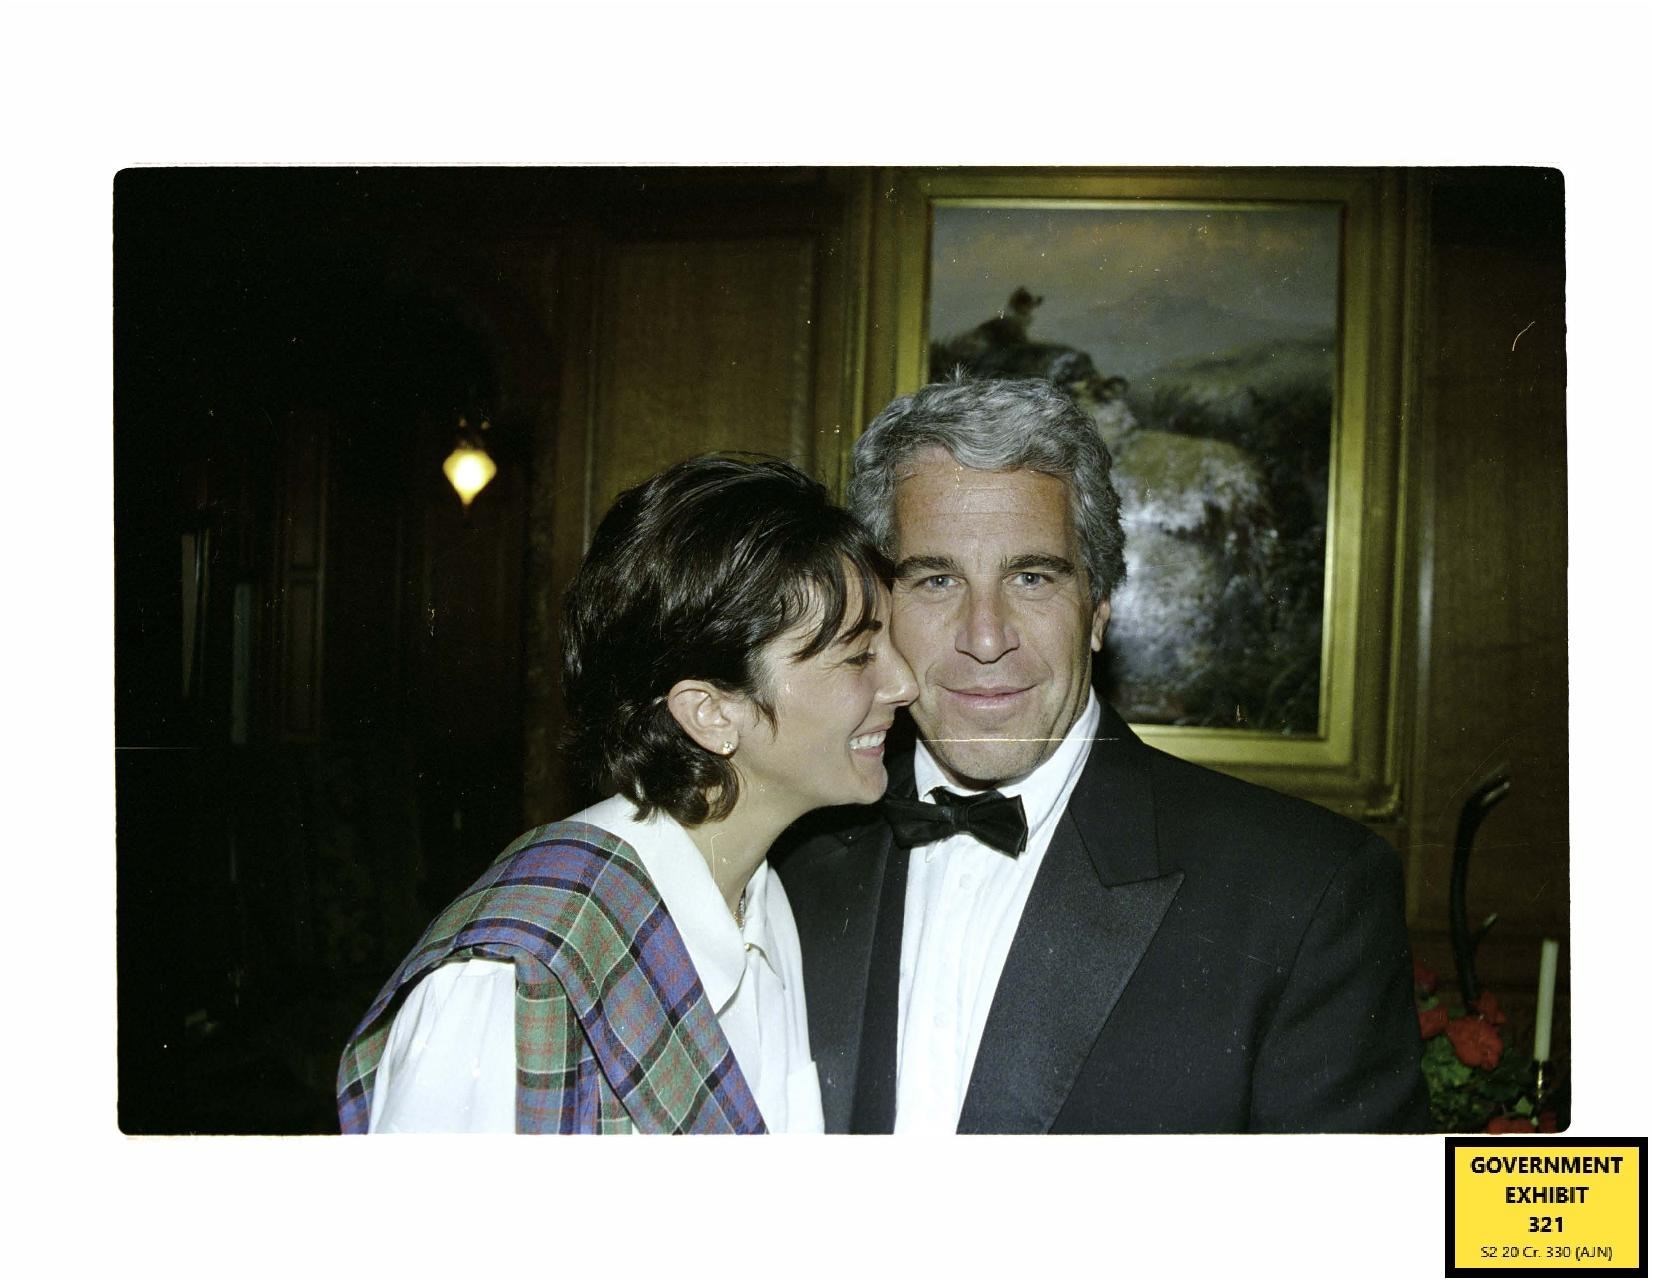 Epstein was quizzed over whether he and Maxwell forced Ms Giuffre to have sex with Andrew (US Department of Justice/PA)